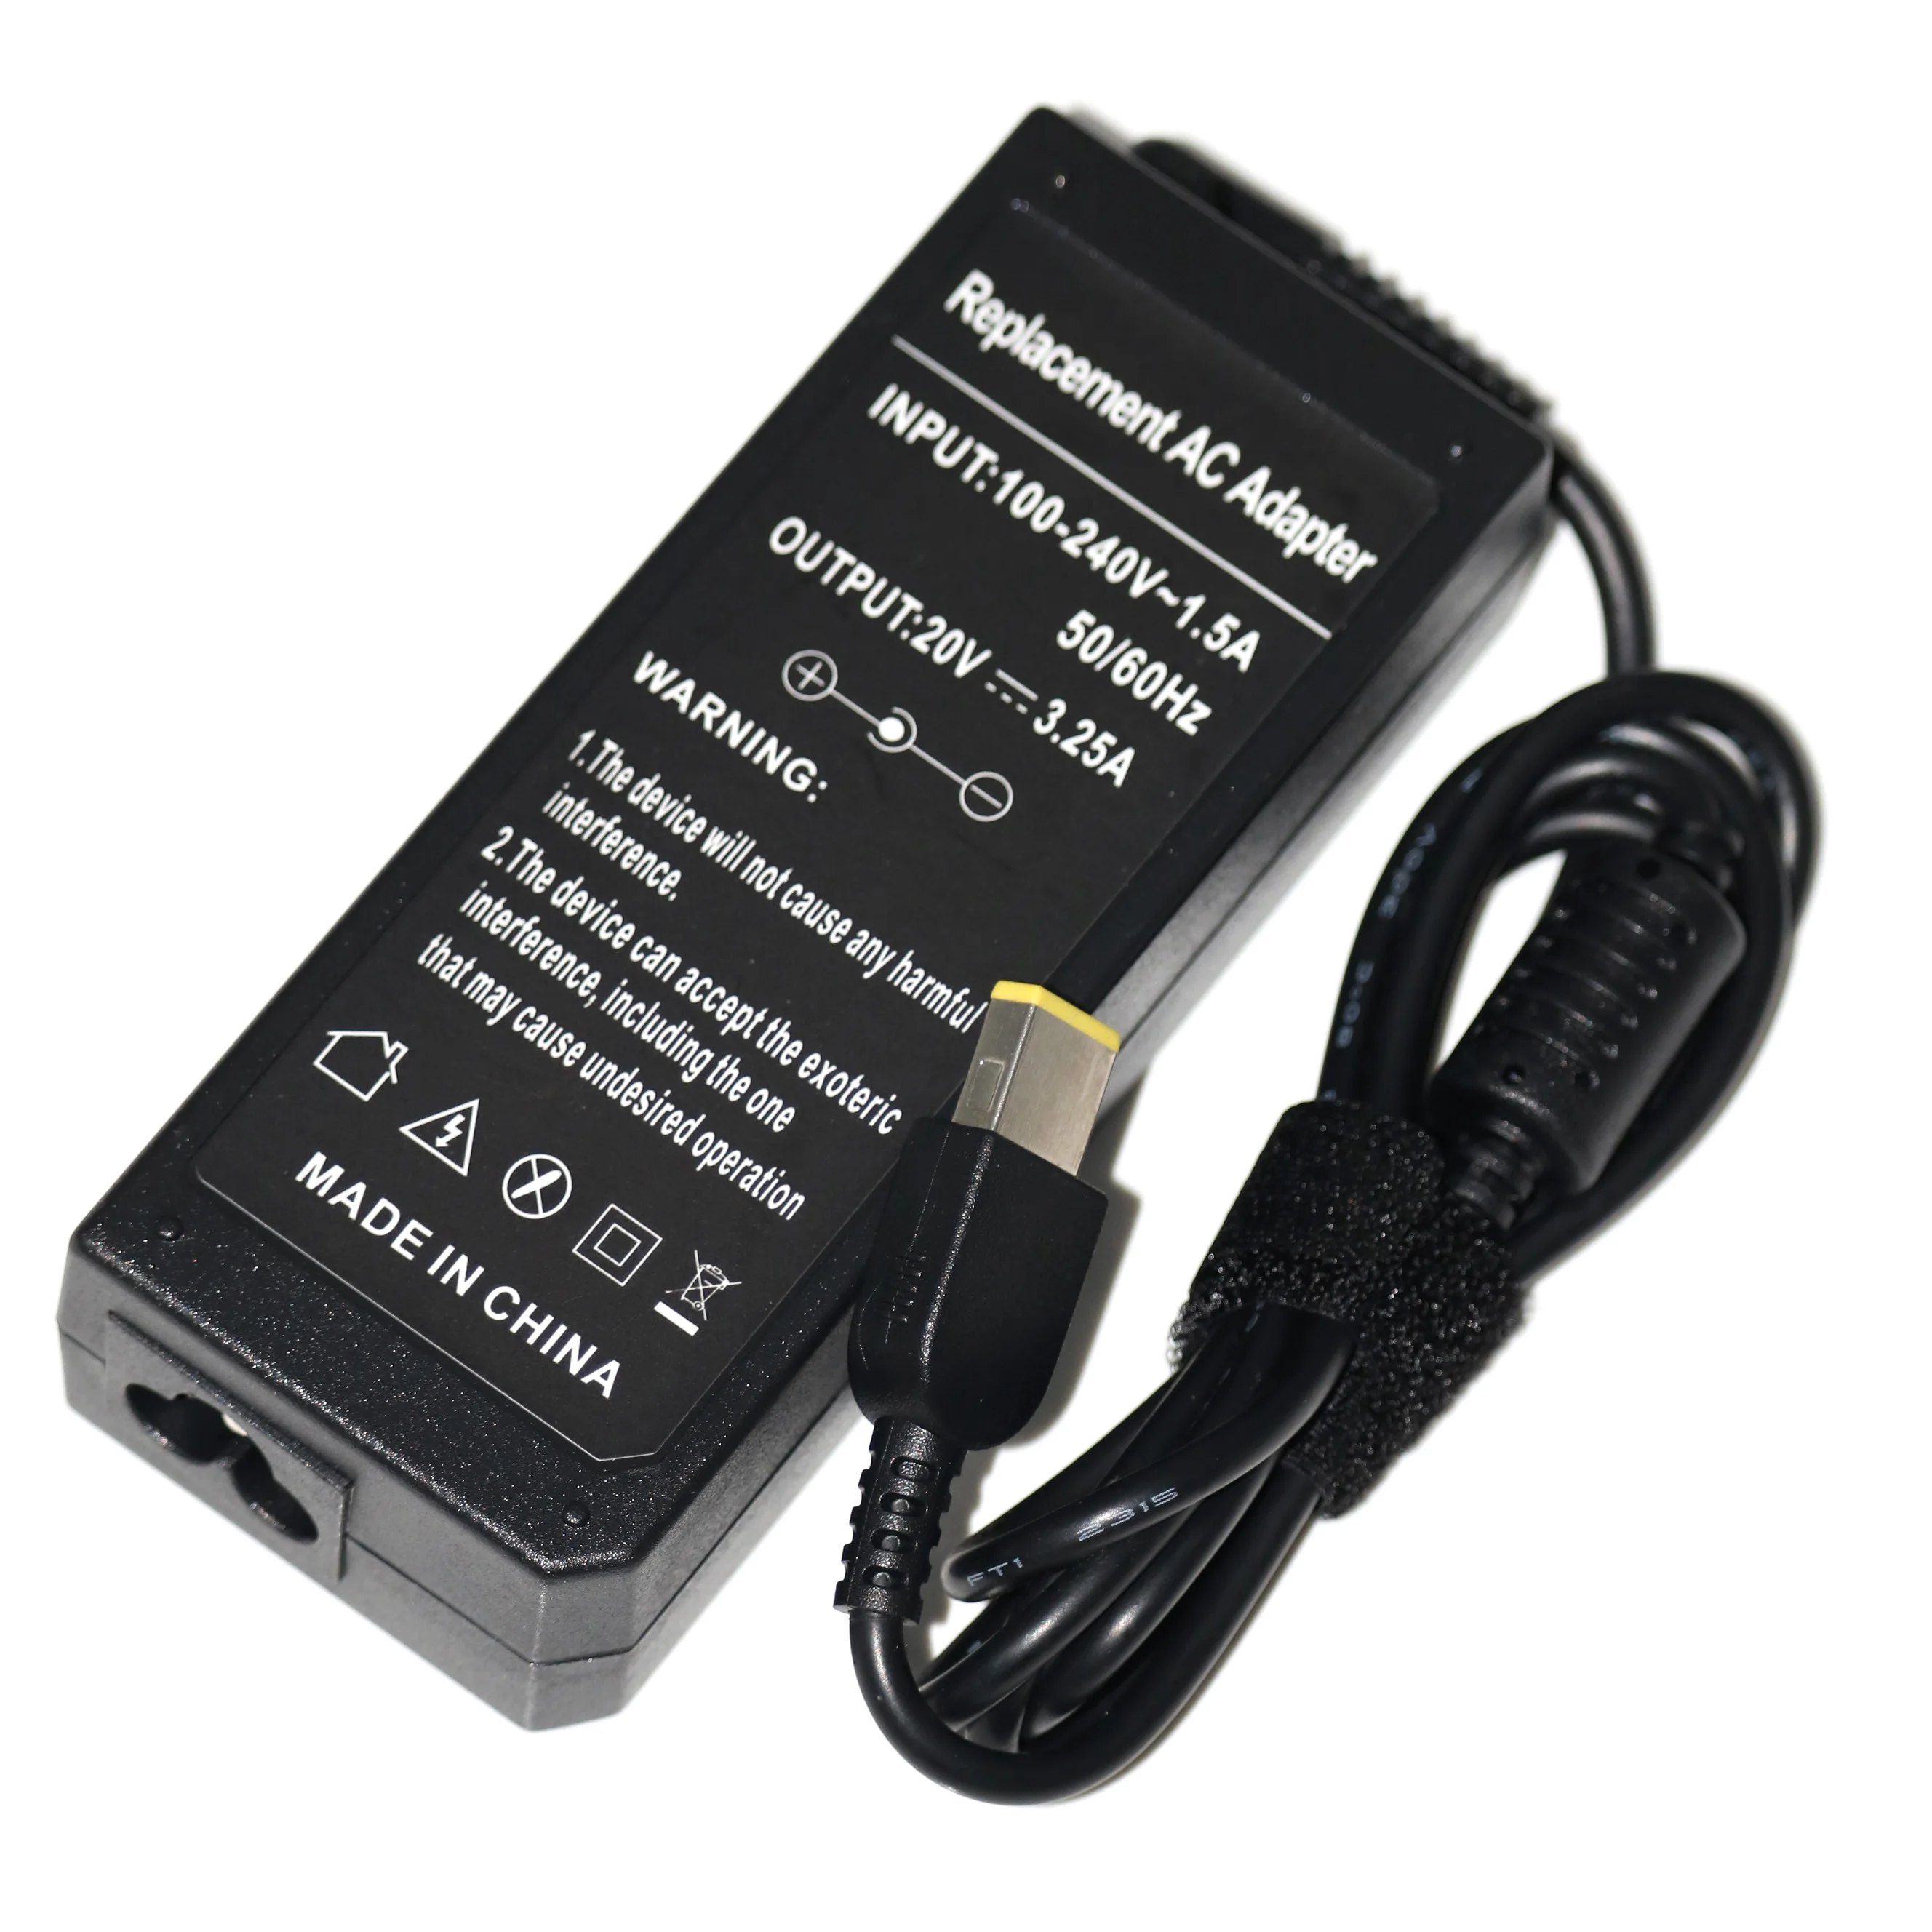 

AC Laptop Power Adapter Charger 20V 3.25A 65W For Lenovo Yoga 13 G400 G500 G505 G405 For Thinkpad X300S X301S X230S S230U